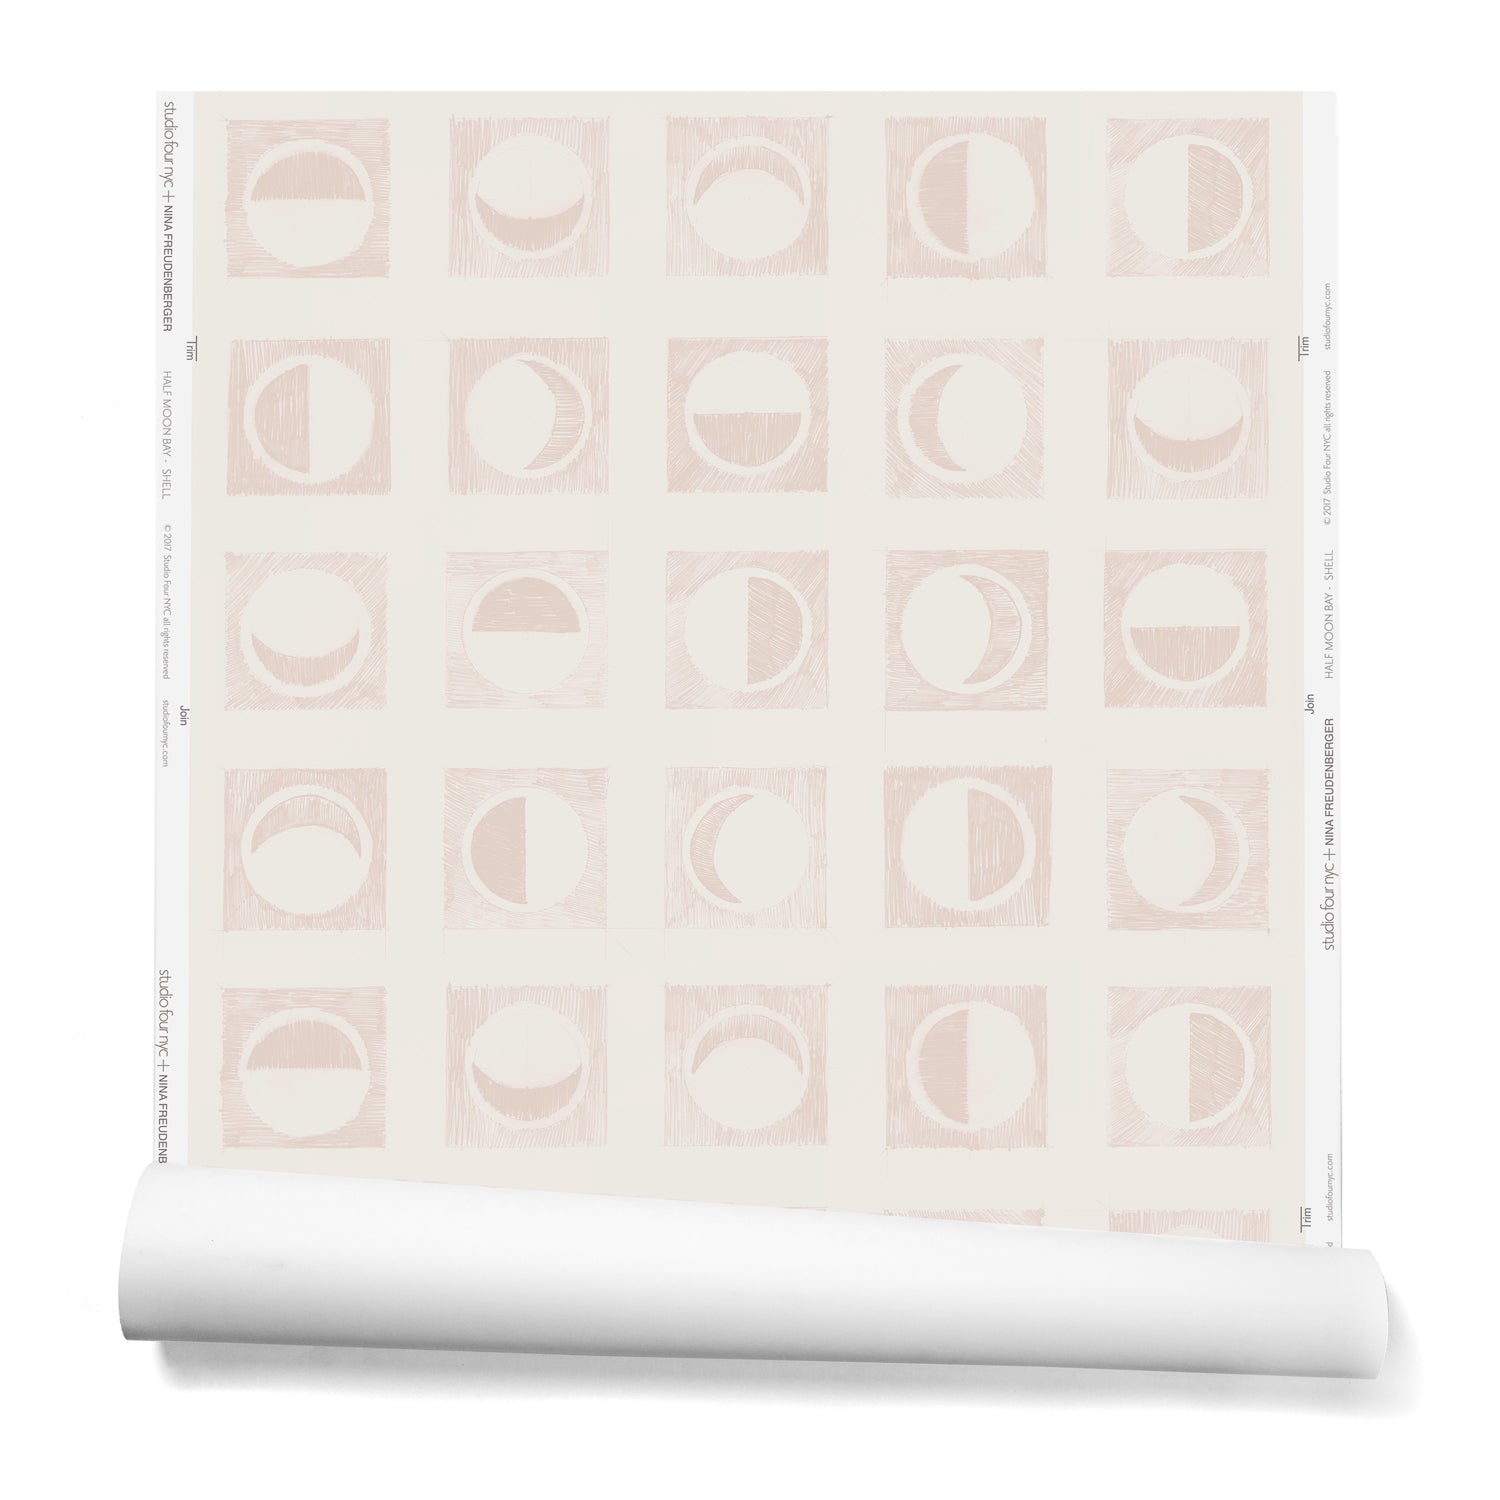 Partially unrolled wallpaper roll with rows of block-printed moons in various phases. Moons are light pink on a beige background.